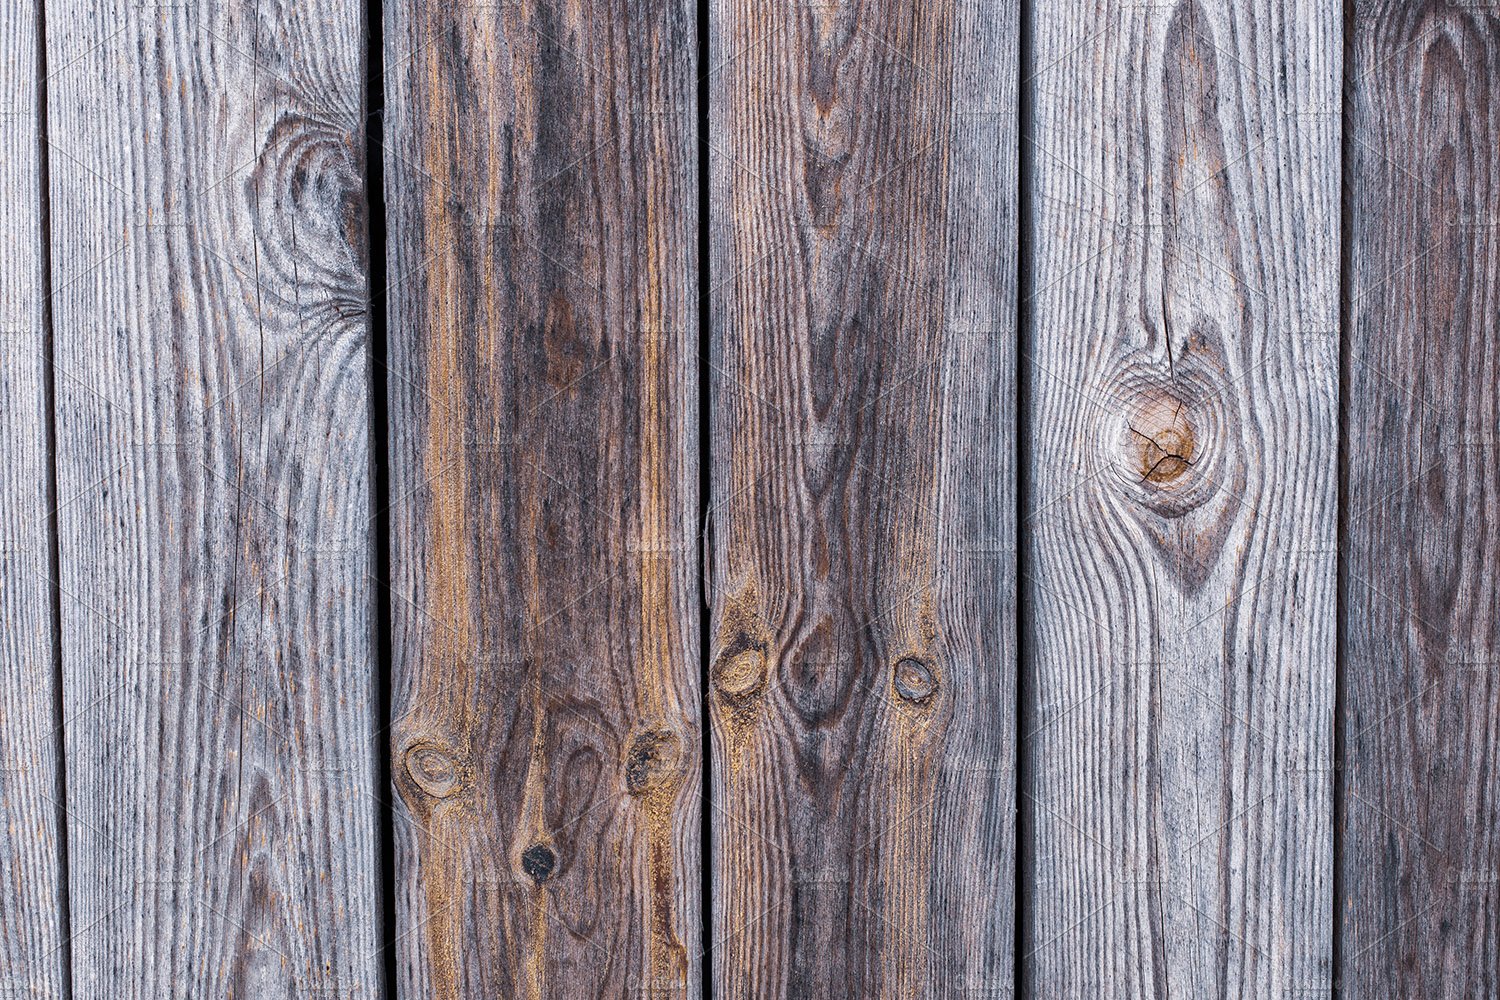 Wooden Background from Old Wood Planks Graphic by VetalStock